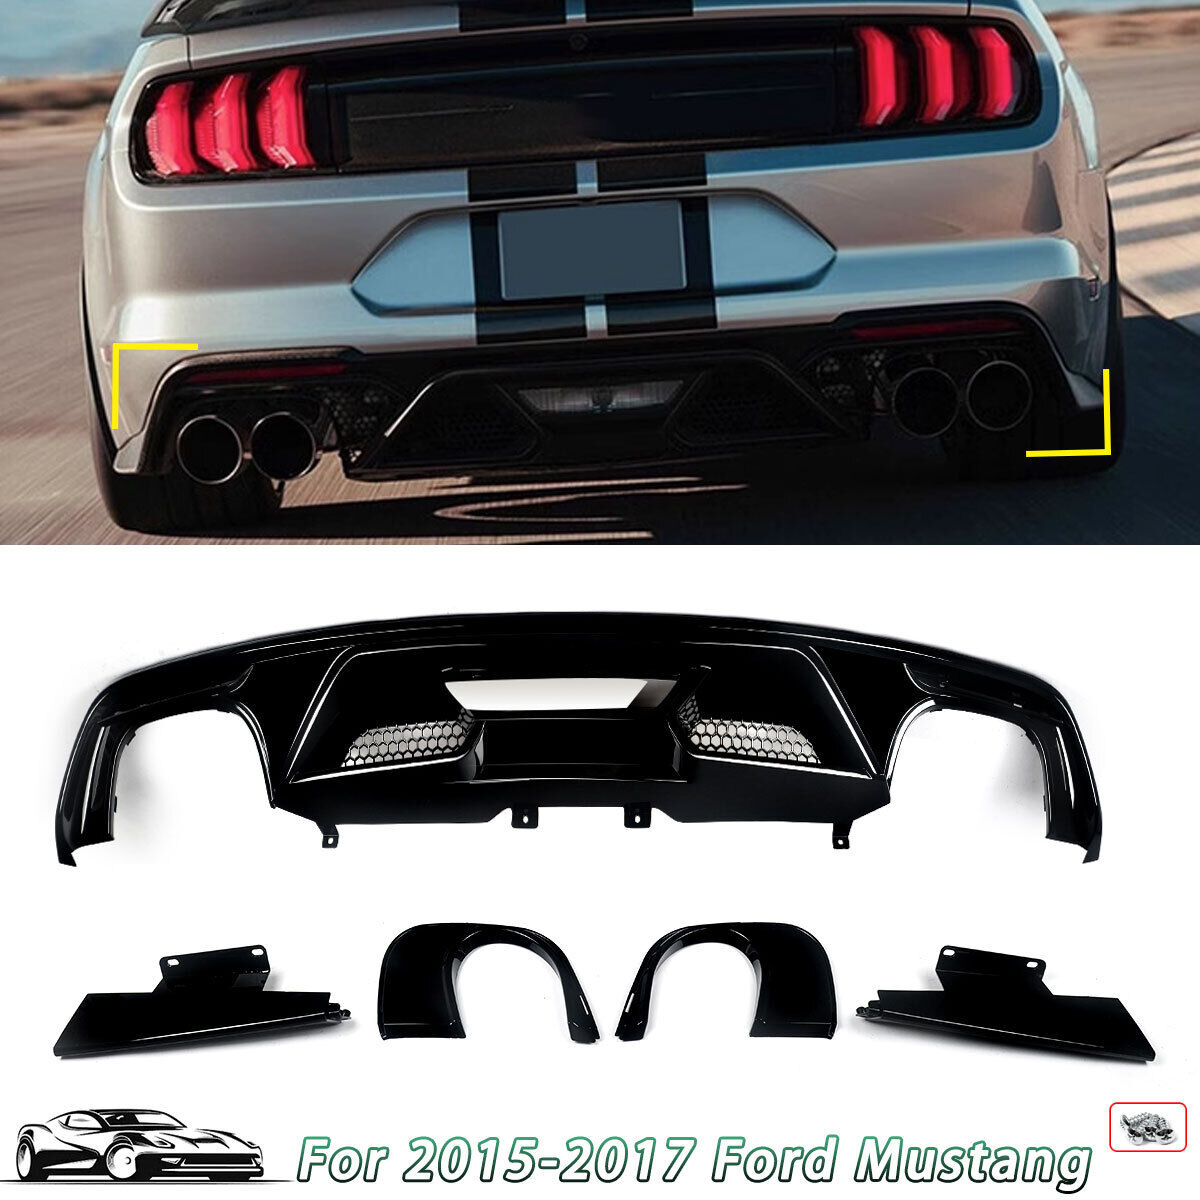 GT500 Style Fits 15-17 Ford Mustang Gloss Black Rear Bumper Diffuser Lip Valance